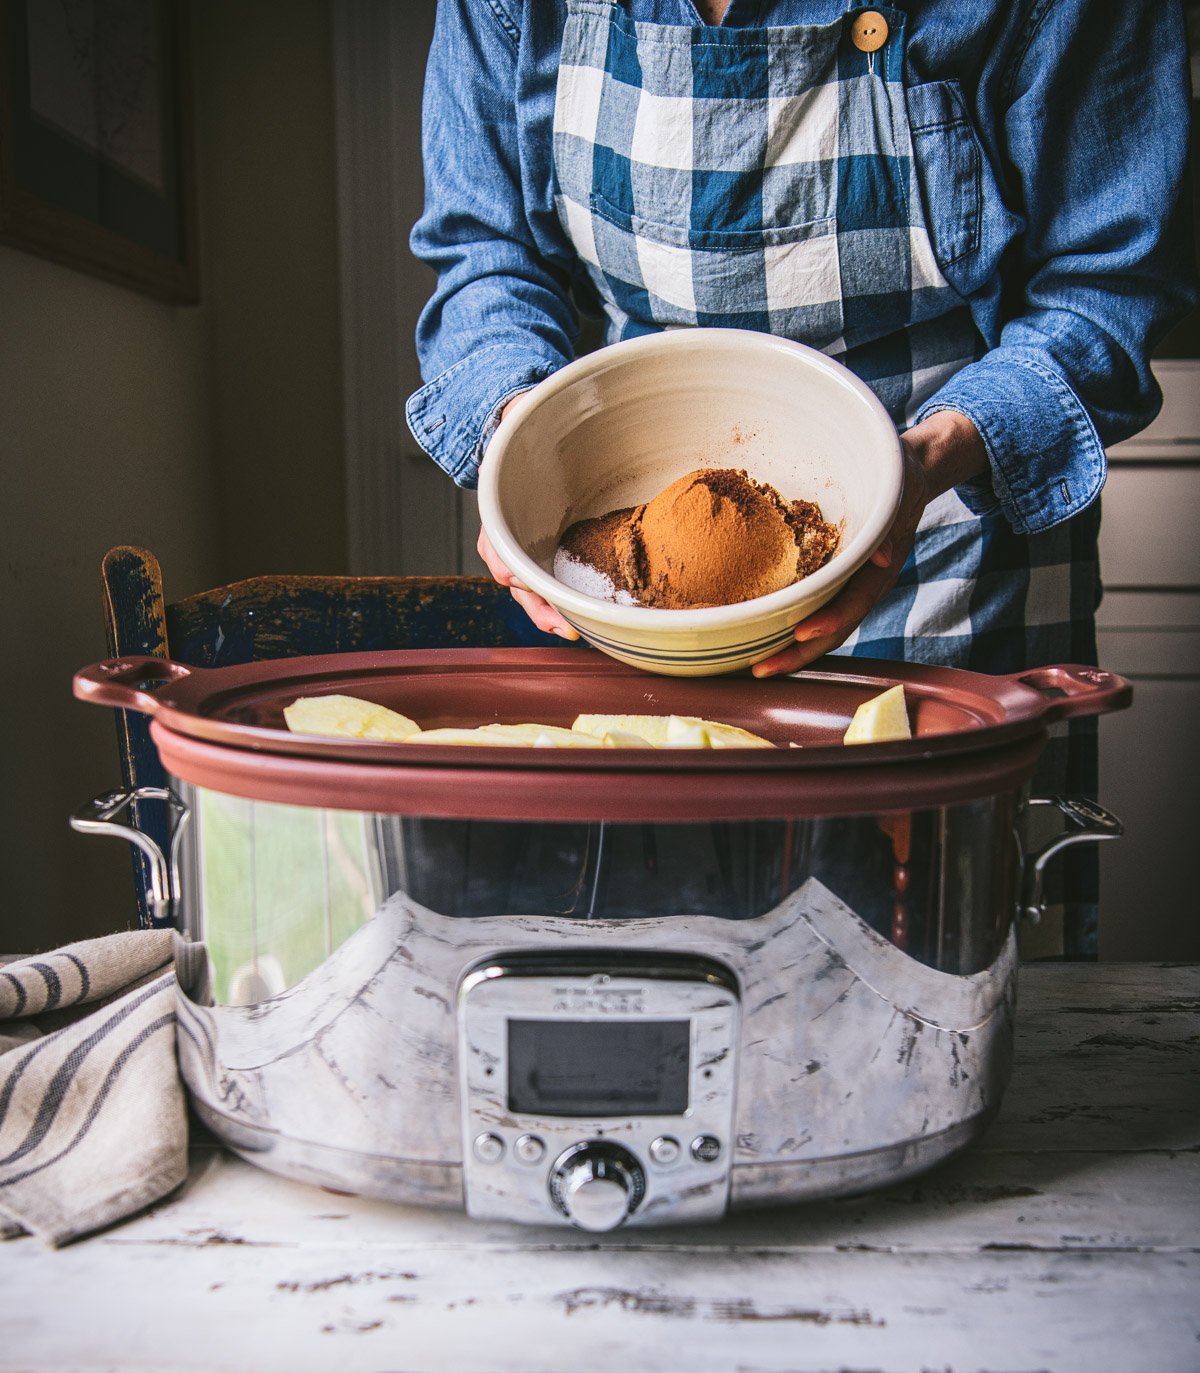 I'm Giving Away an All-Clad Slow Cooker!